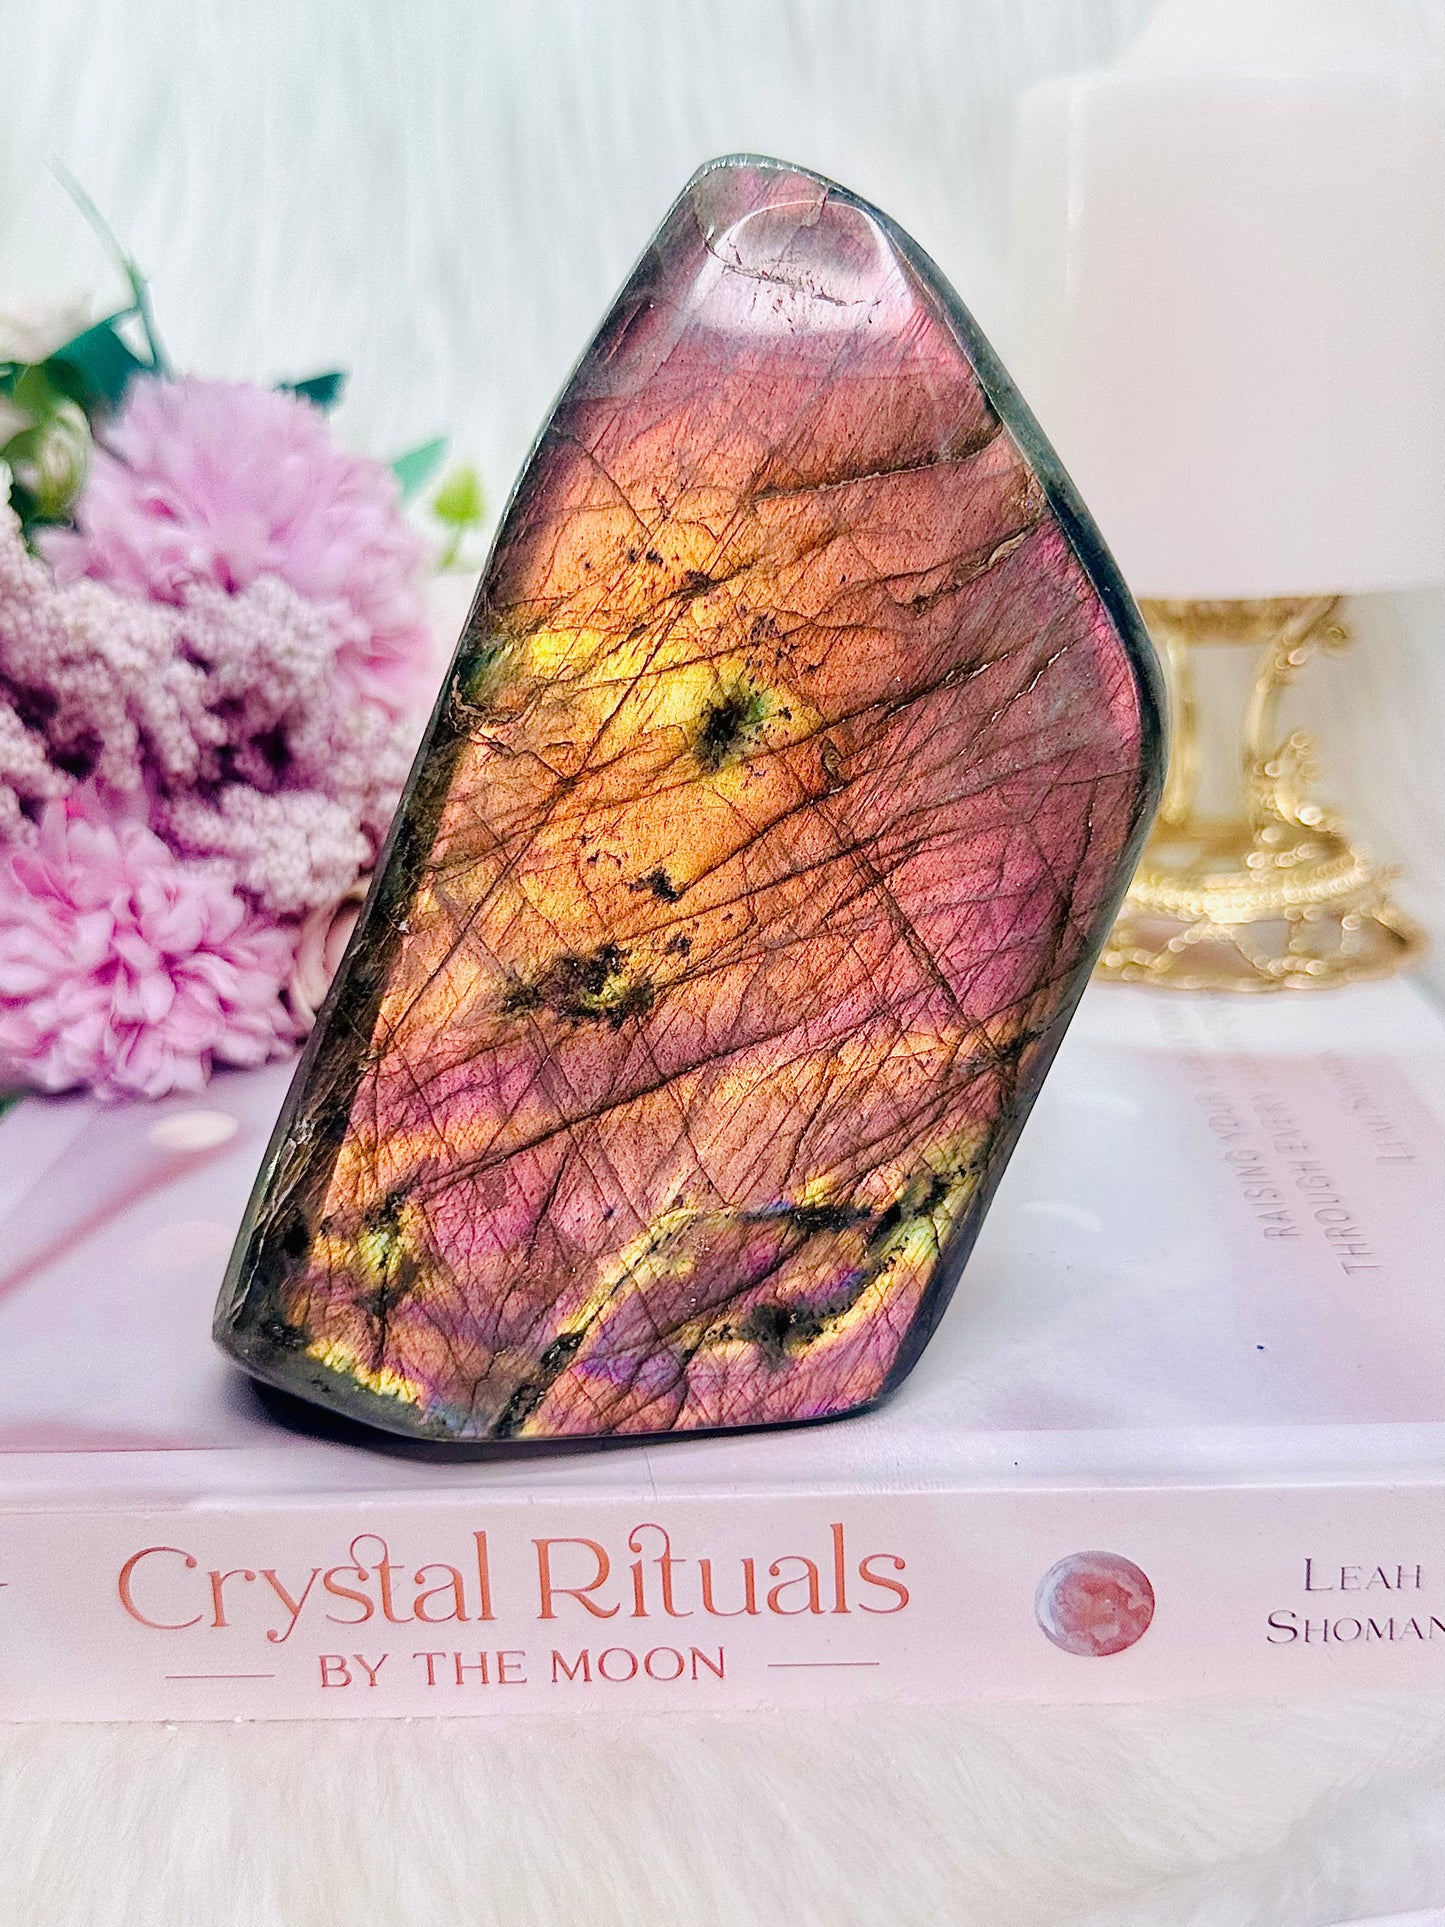 Wow!!!!!!! She Doesn’t Hide Her Flash!!!! Classy & Fabulous Large 742gram Labradorite Polished Freeform with Spectacular Pink Orange & Yellow Flash ~ Truly Divine Piece